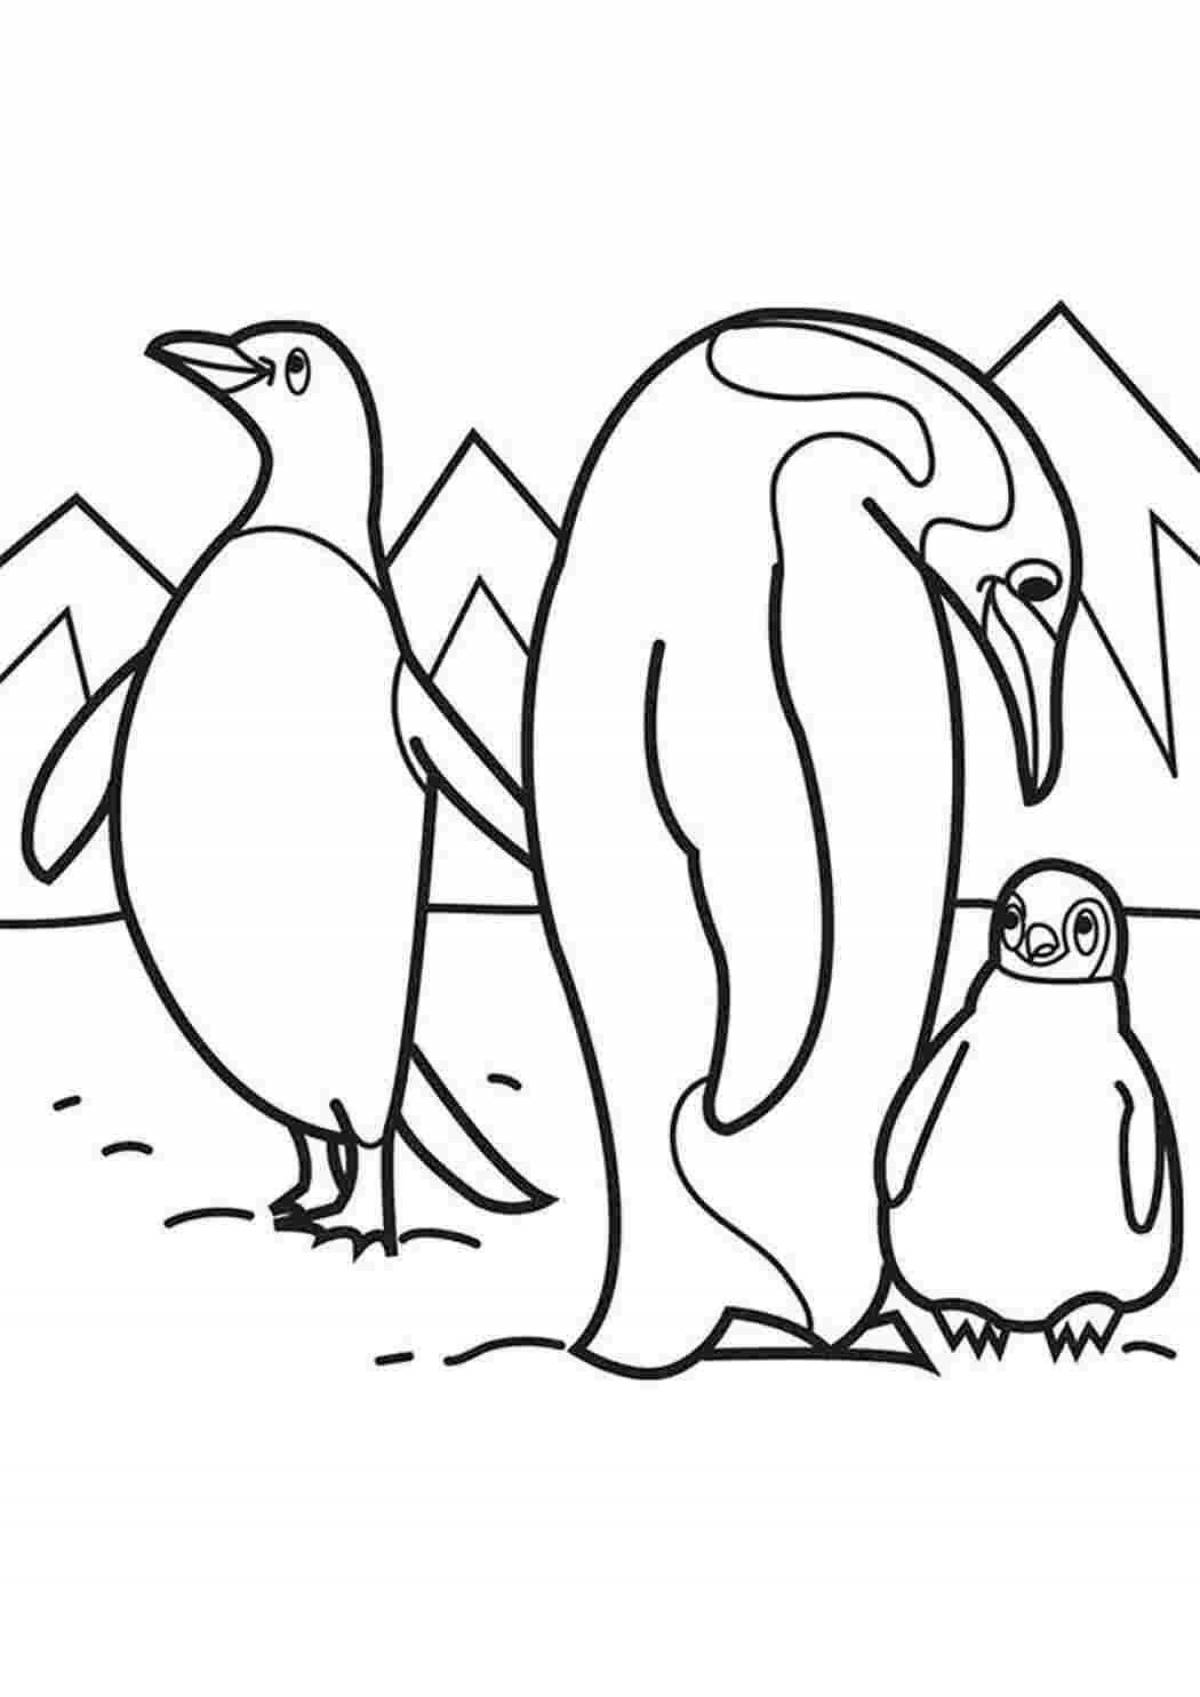 Penguin family holiday coloring book